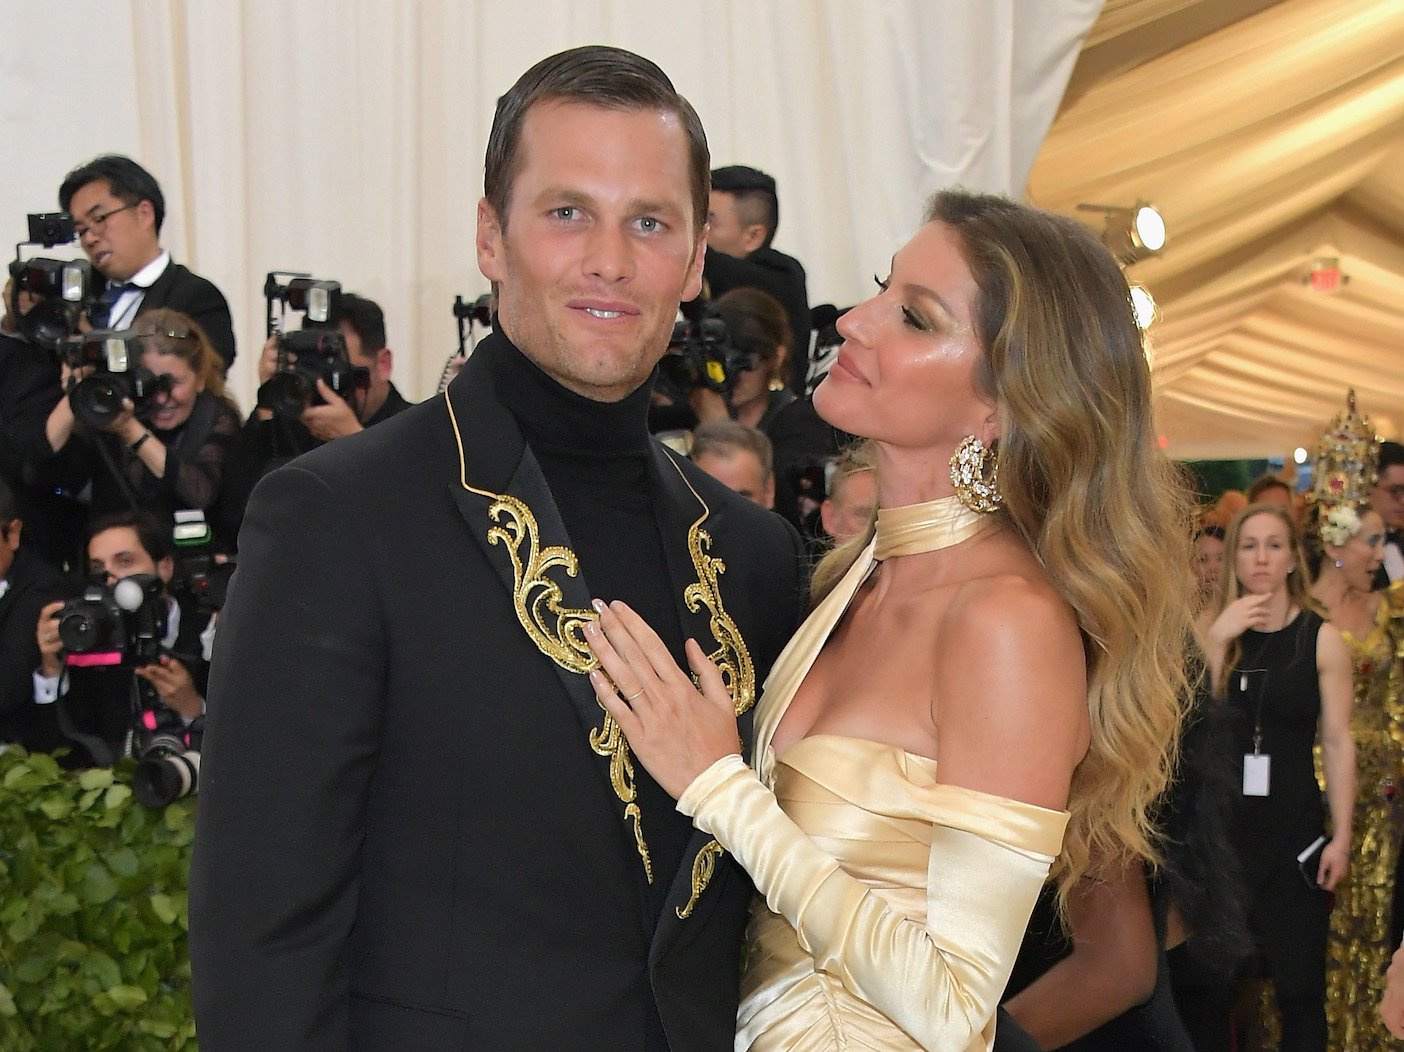 Tom Brady Allegedly Facing $650M Divorce Over NFL Return If He Doesn’t Retire, Anonymous Source Says